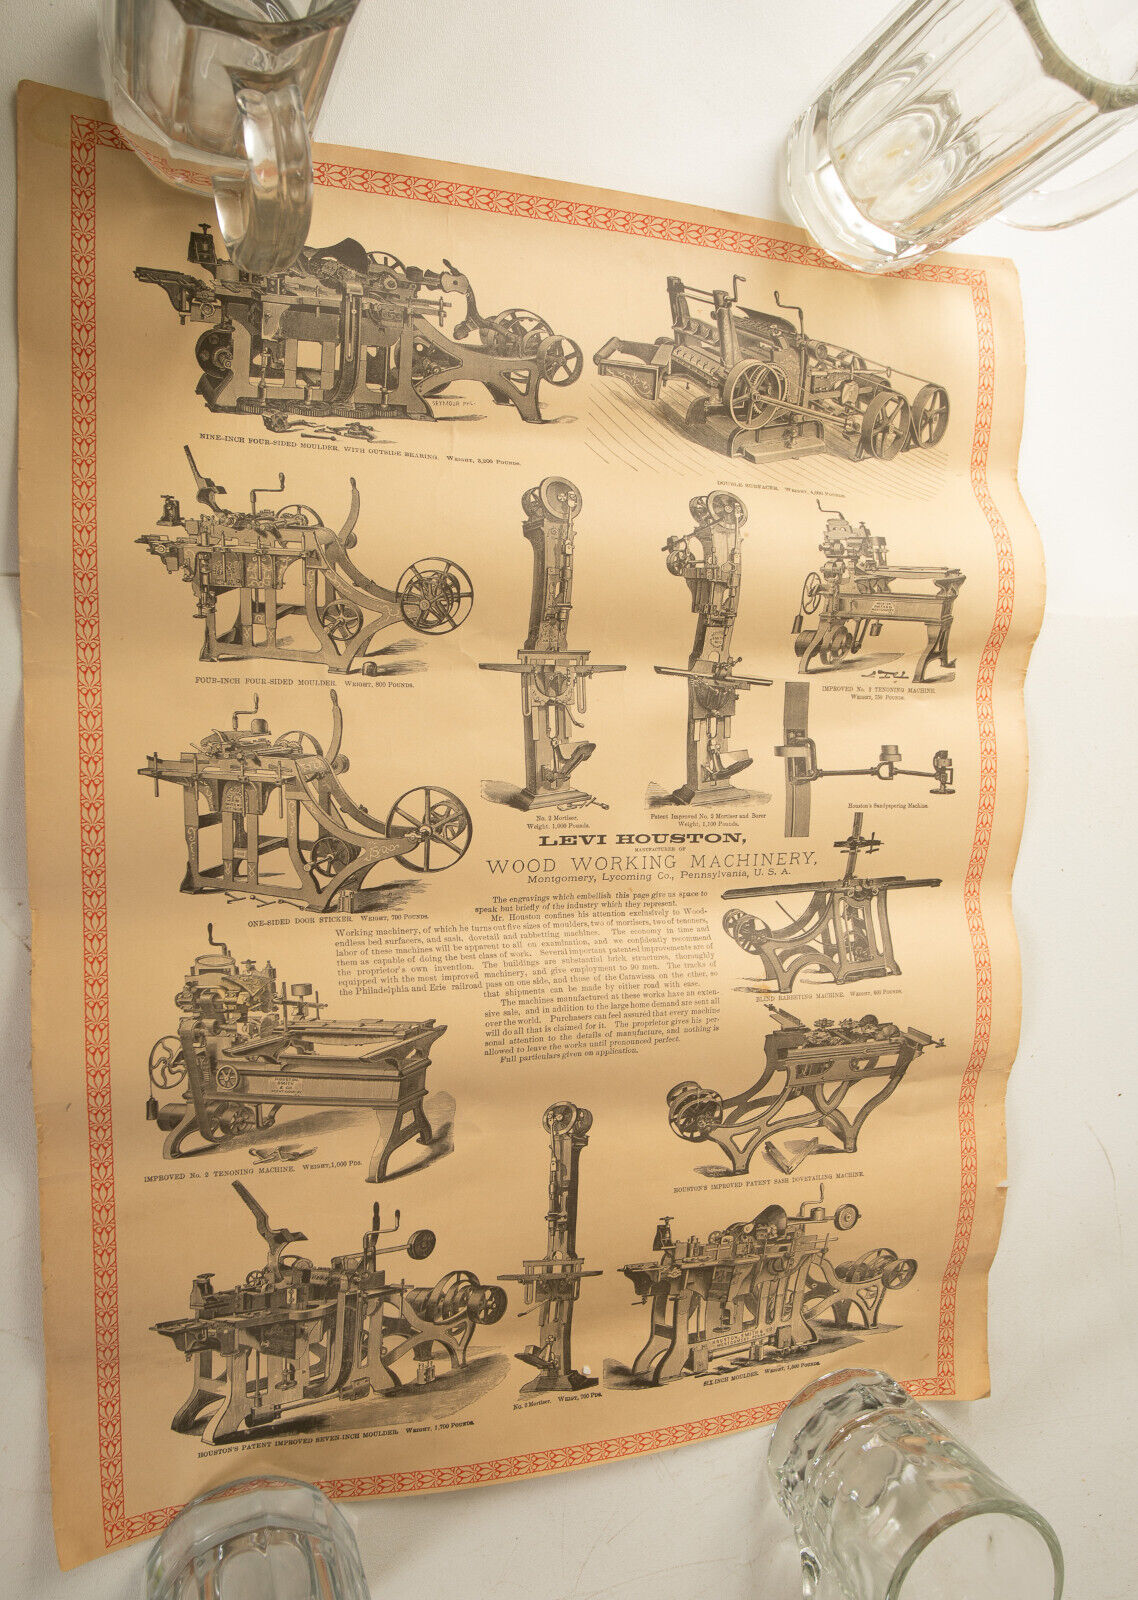 Levi Houston Wood Working Machinery Poster (HSE-22) Print (JSF6) Antique PA USA